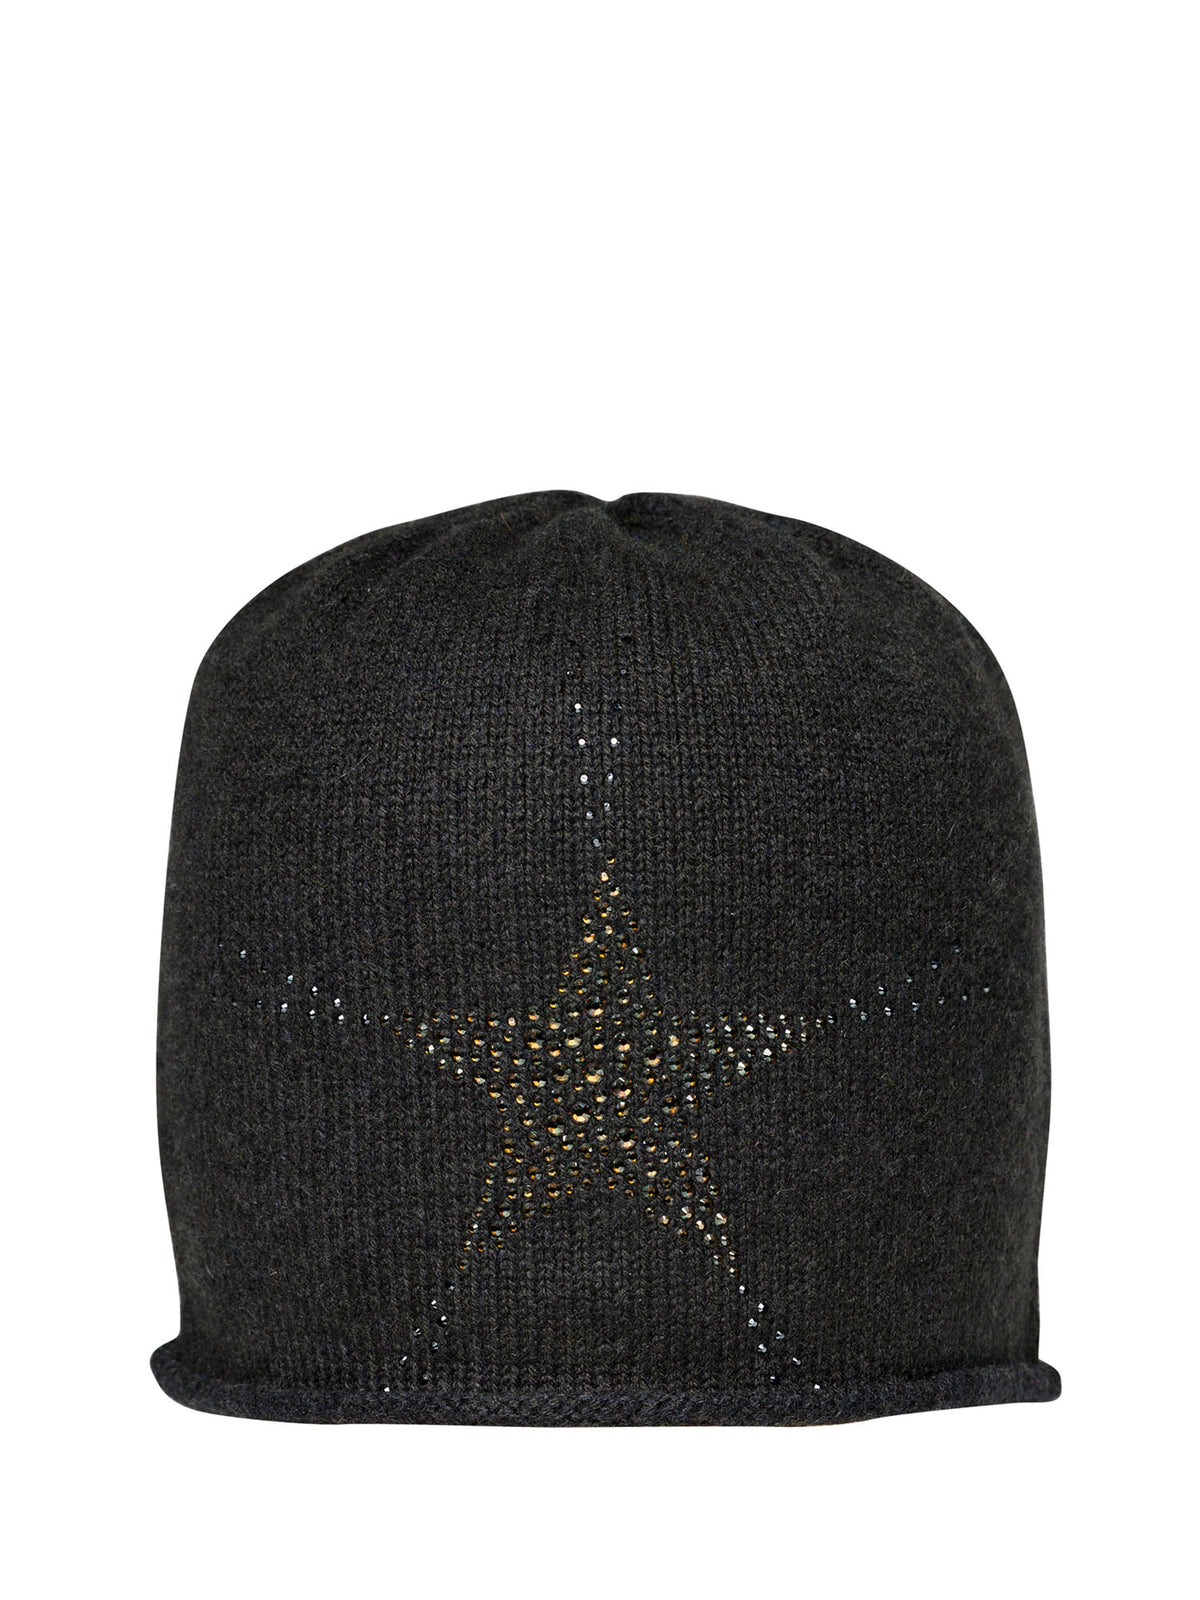 Assam colored slouchy cashmere crystal Star Cloche with a crystal star pattern composed of several sizes of crystals.